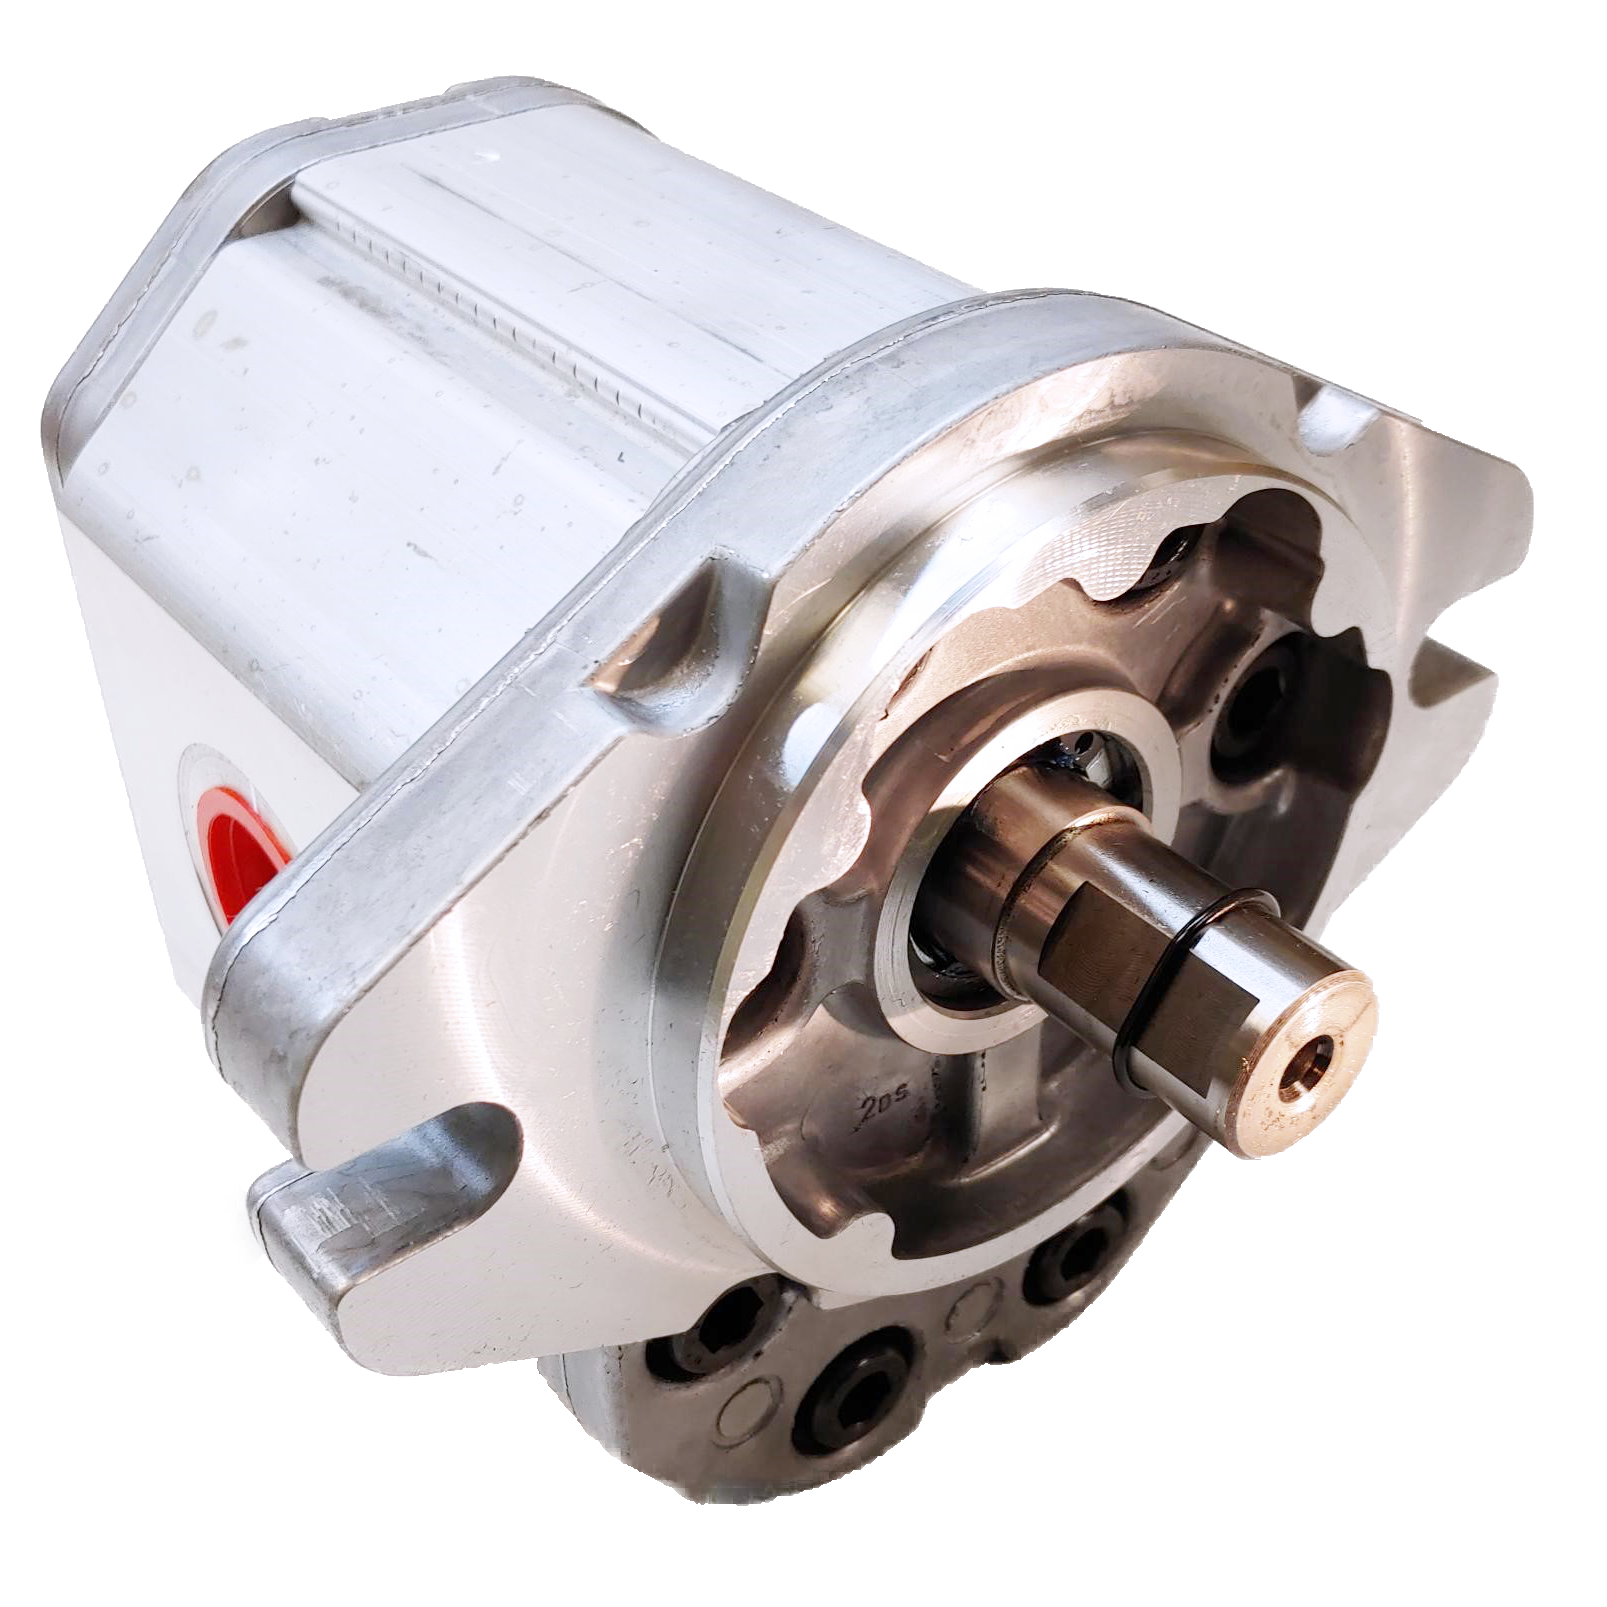 ALM3A-R-94-S1-FA-E4 : Marzocchi Gear Motor, Bidirectional, 61cc, 2755psi rated, 2800RPM, 1.5" (#24) SAE ports, 9T 16/32DP Splined Shaft